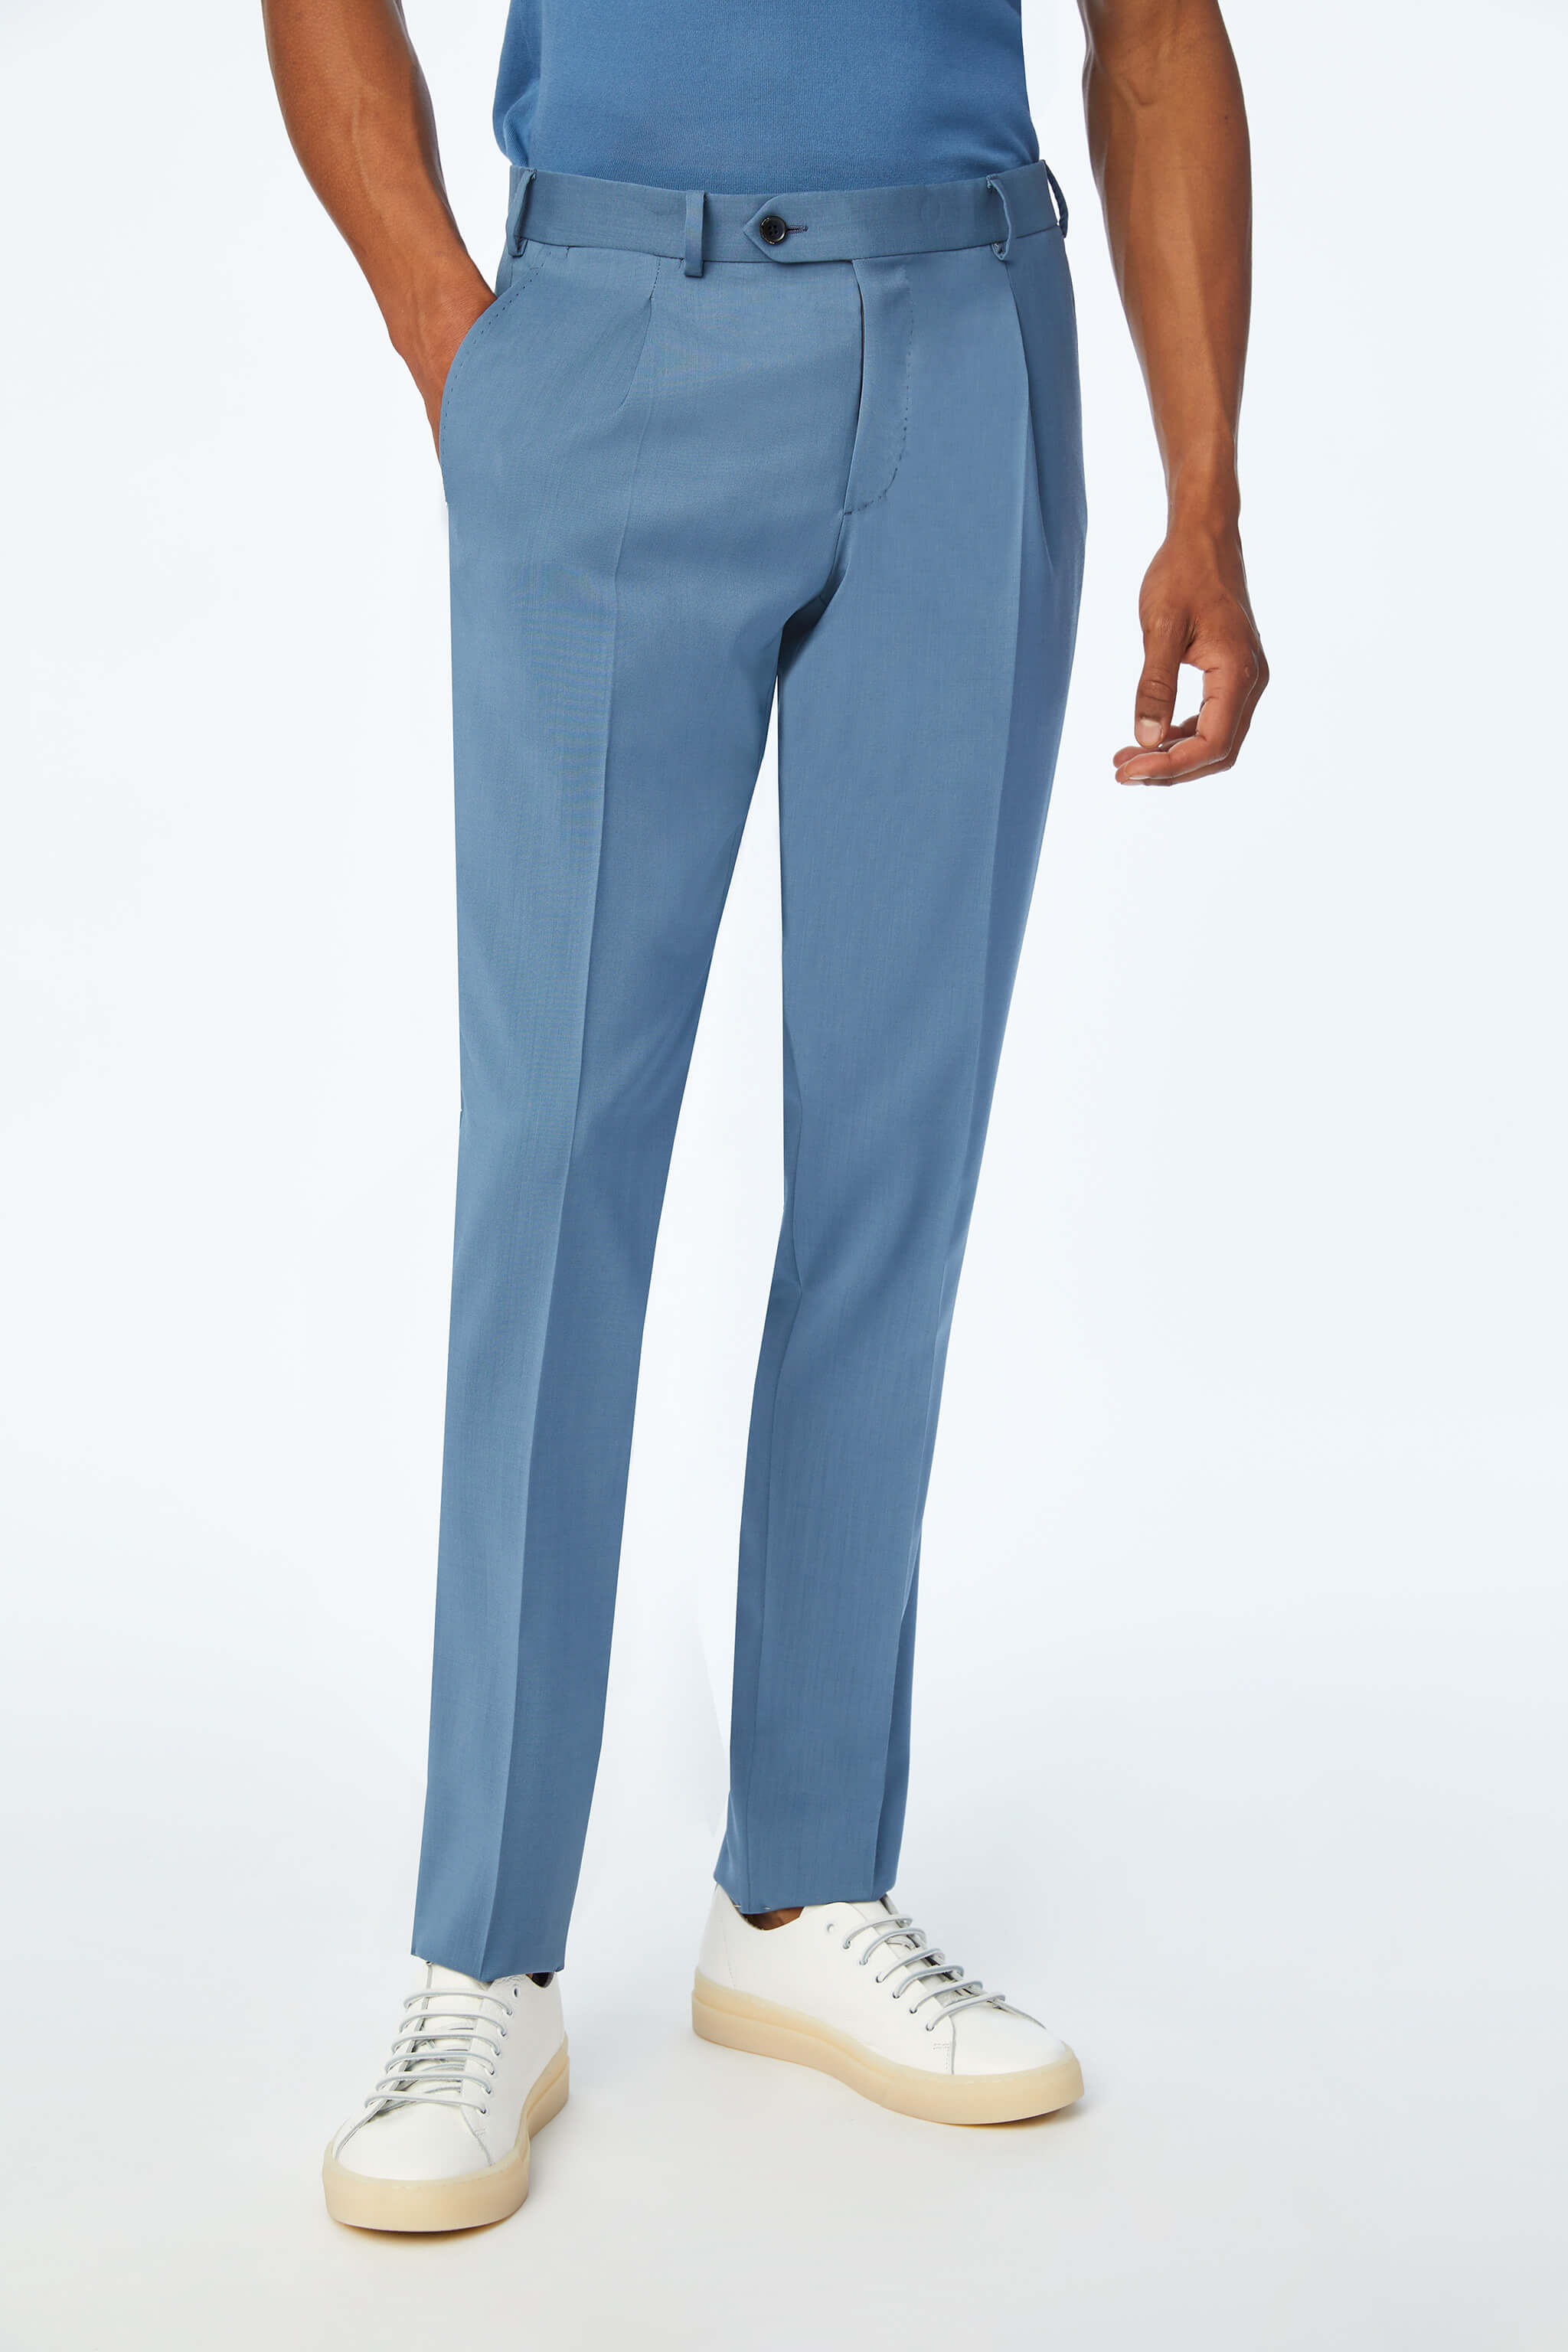 Garment-dyed TOM suit in light Blue